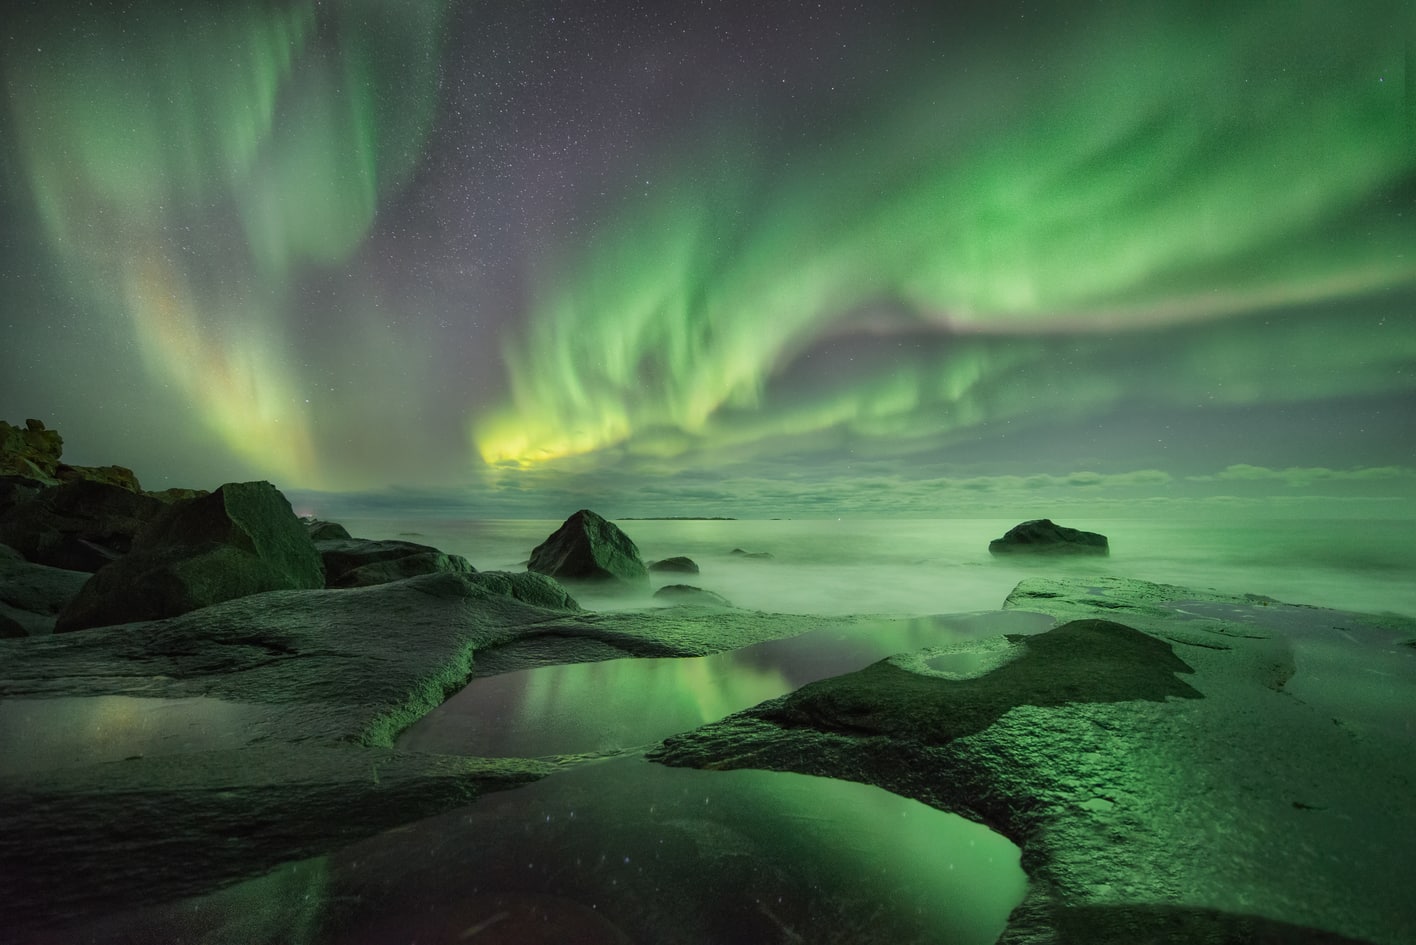 Best places to photograph Northern Lights in Norway